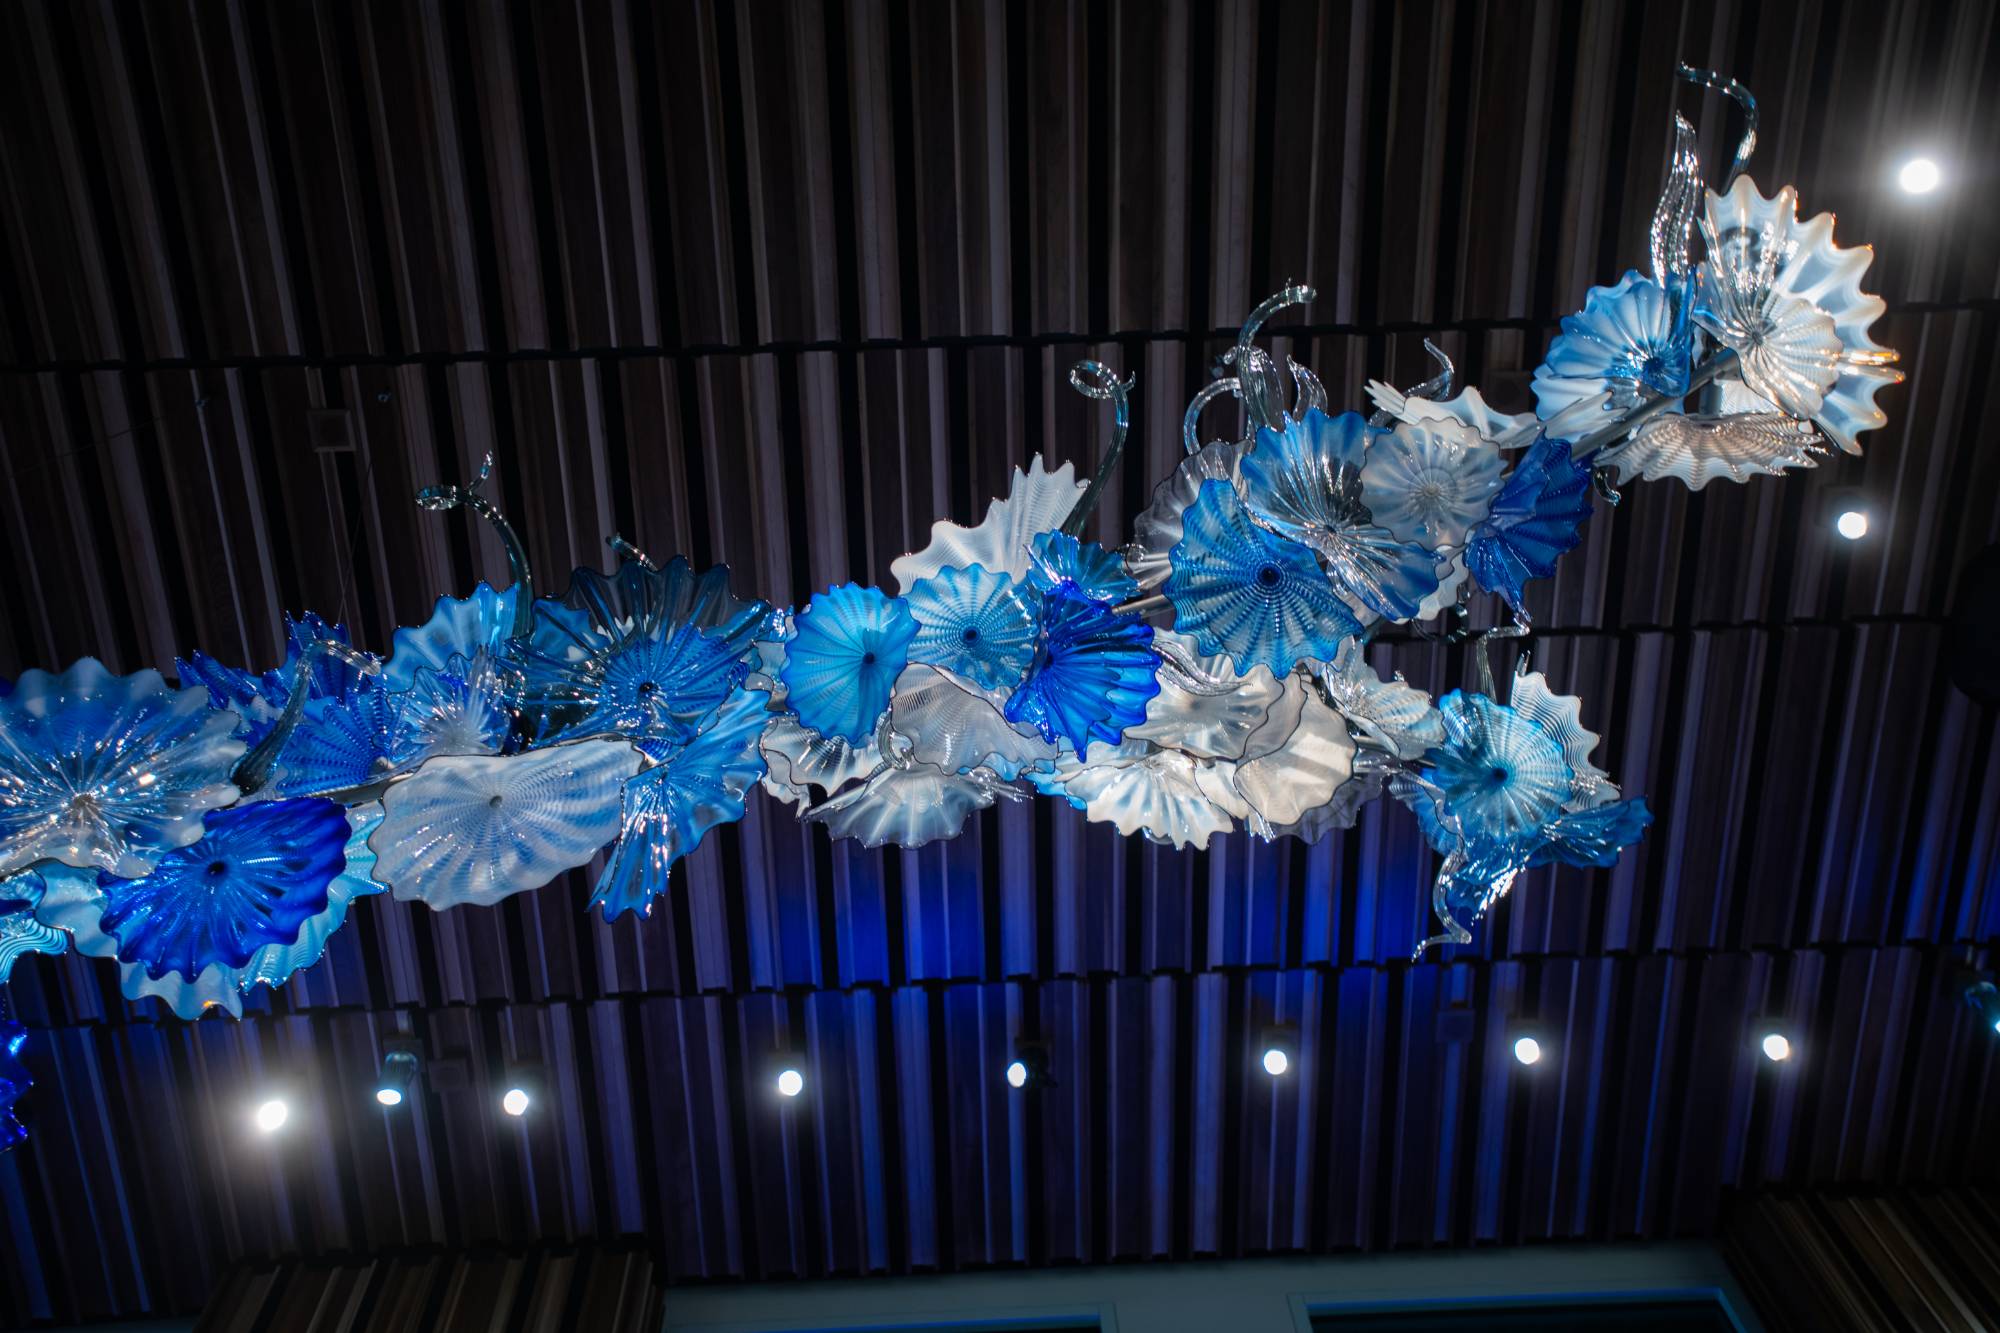 white and blue fan-like forms suspended from the ceiling